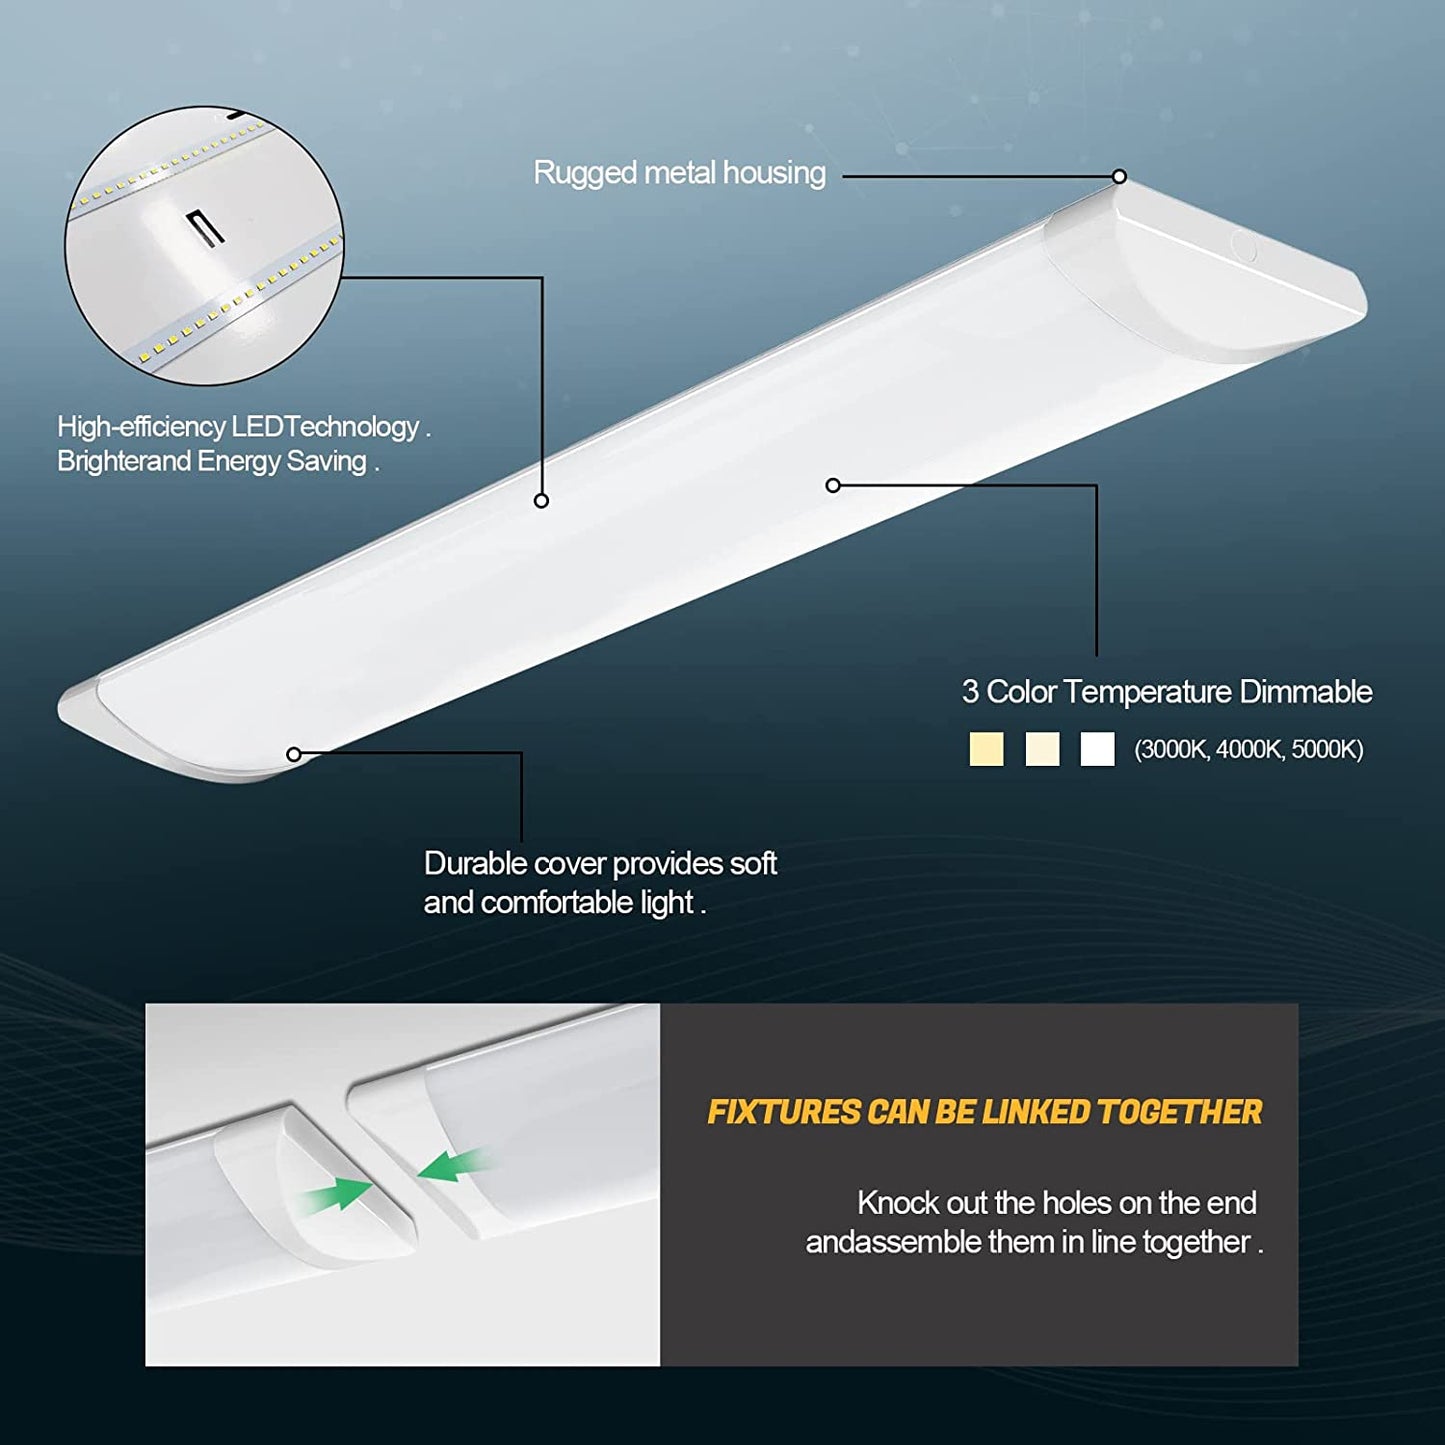 AntLux 4FT LED Wraparound Puff Lights, 50W/5500LM, 3 Color Temperature Dimmable LED Wrap Light, 4 Foot LED Flush Mount Ceiling Lights, 48 Inch LED Light Fixtures for Kitchen Laundry Office, White